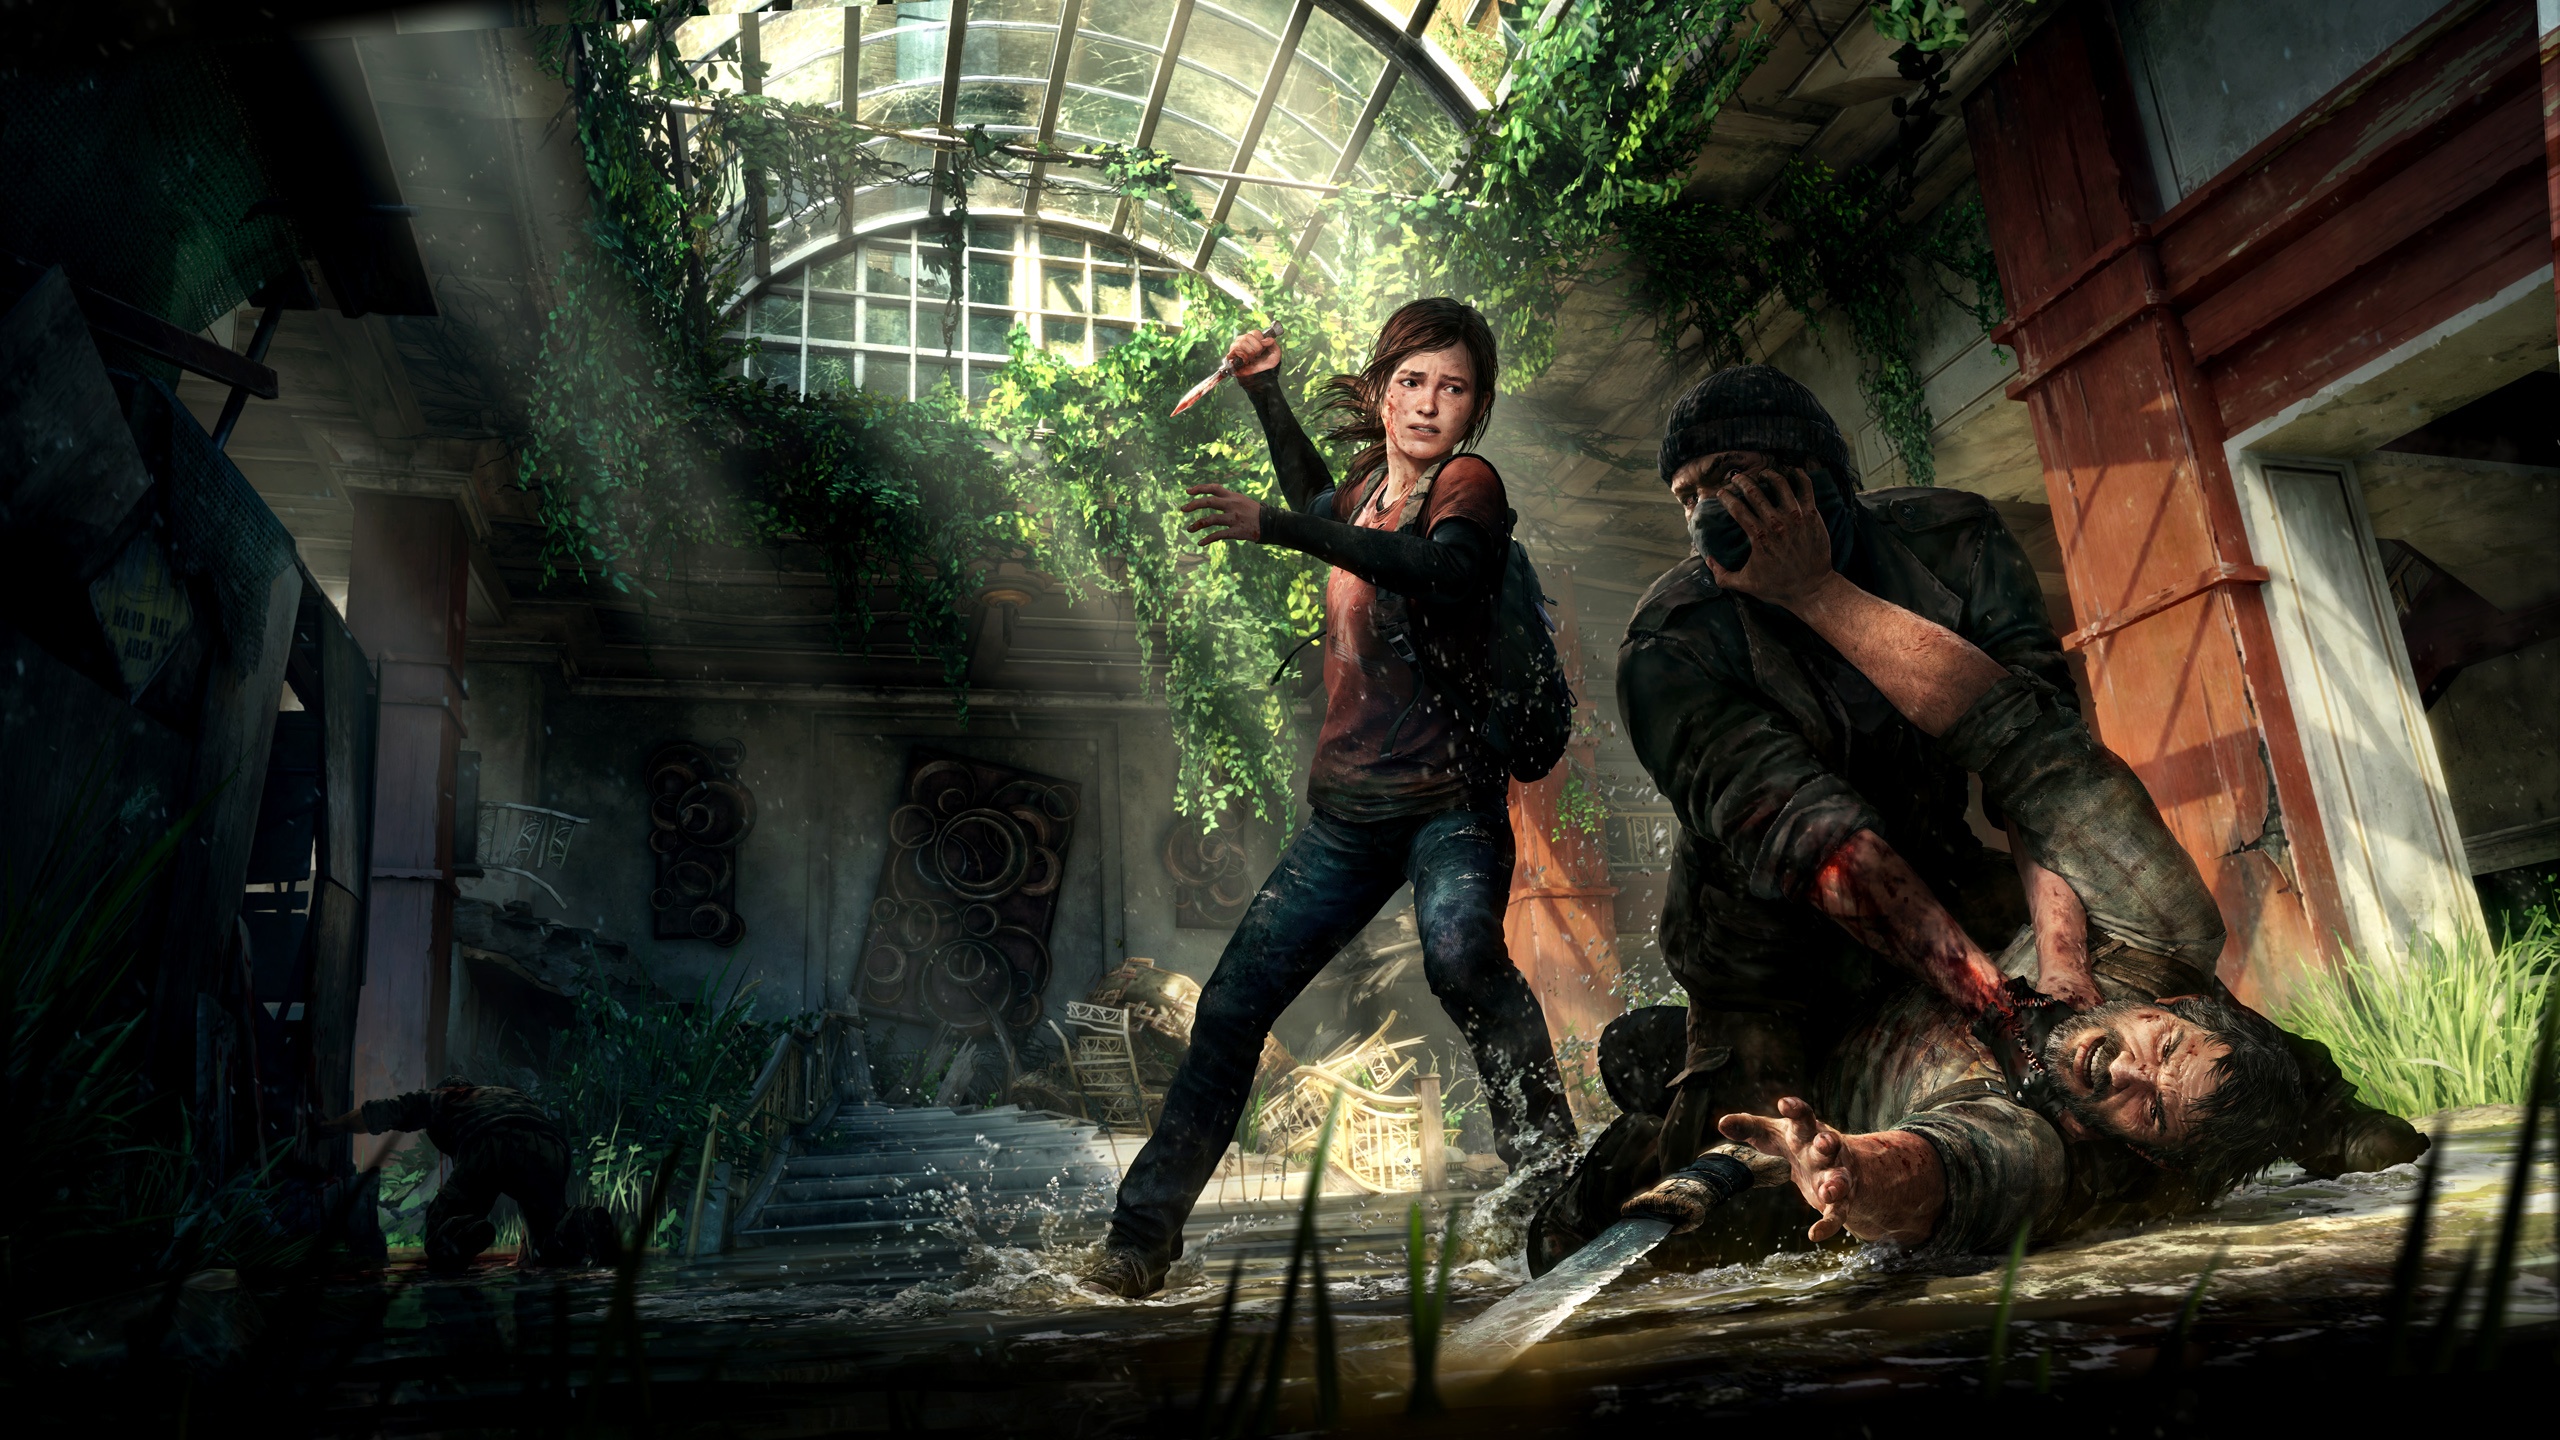 The Last of Us: Remastered wallpaper 03 1920x1080